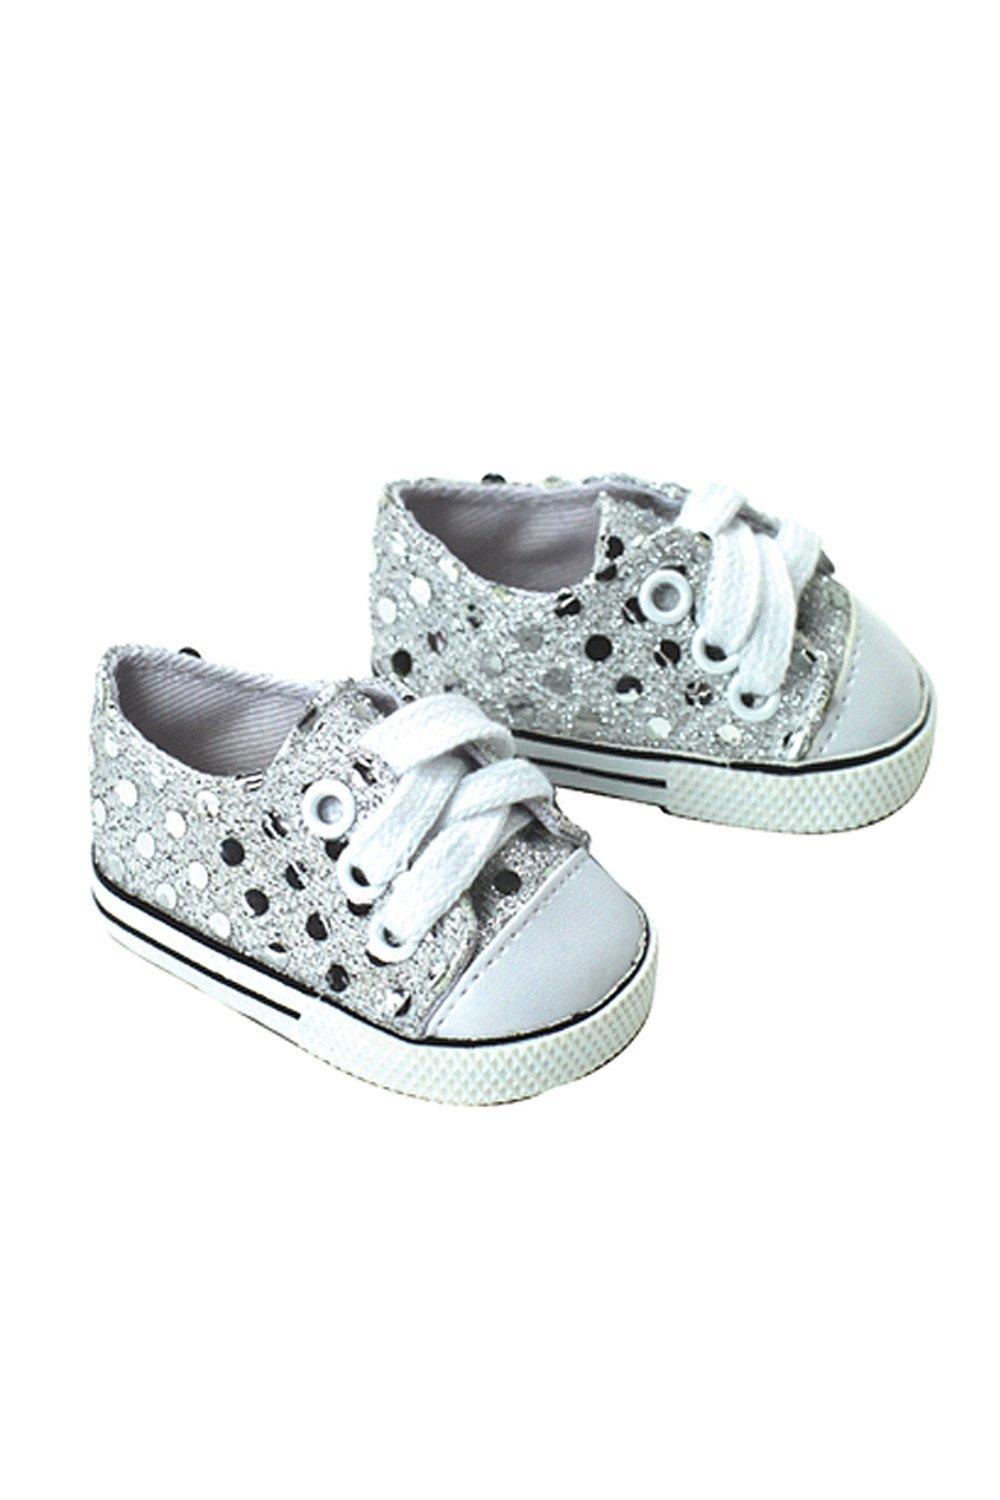 Sophia’s -  18" Baby Doll Shoes with Sequins & Laces Silver